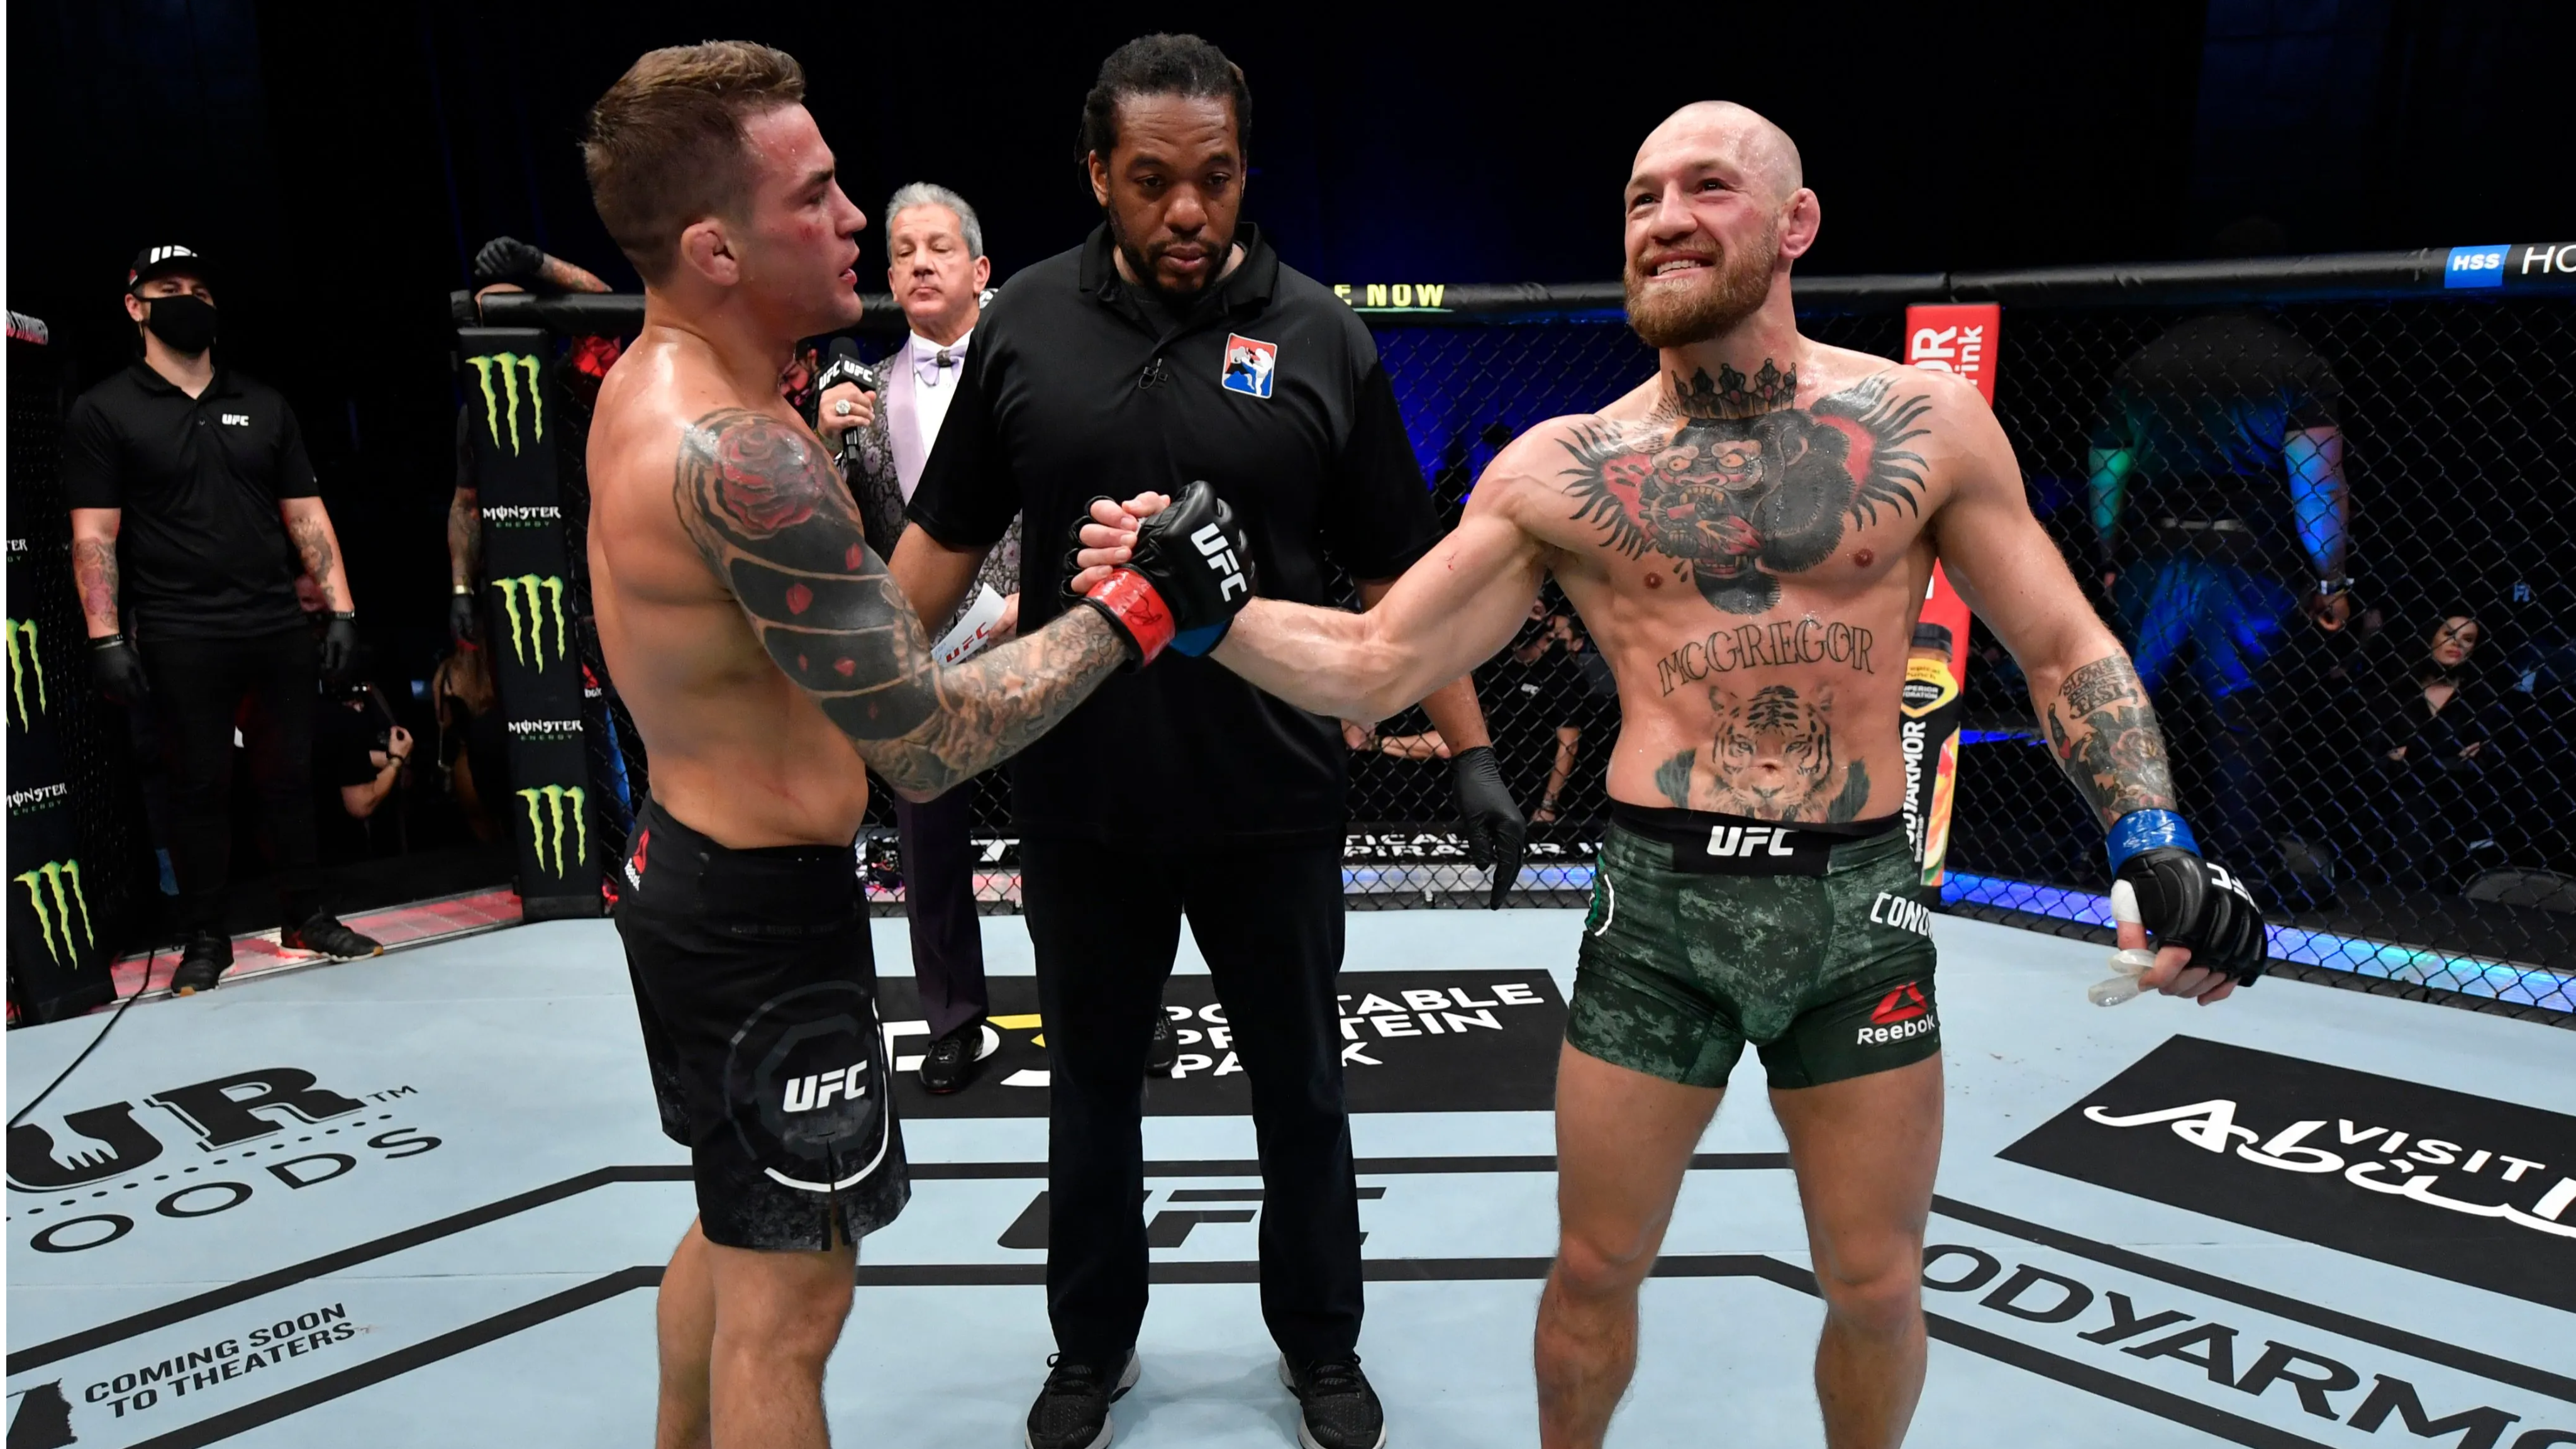 UFC: Connor McGregor knocked out by Dustin Poirier